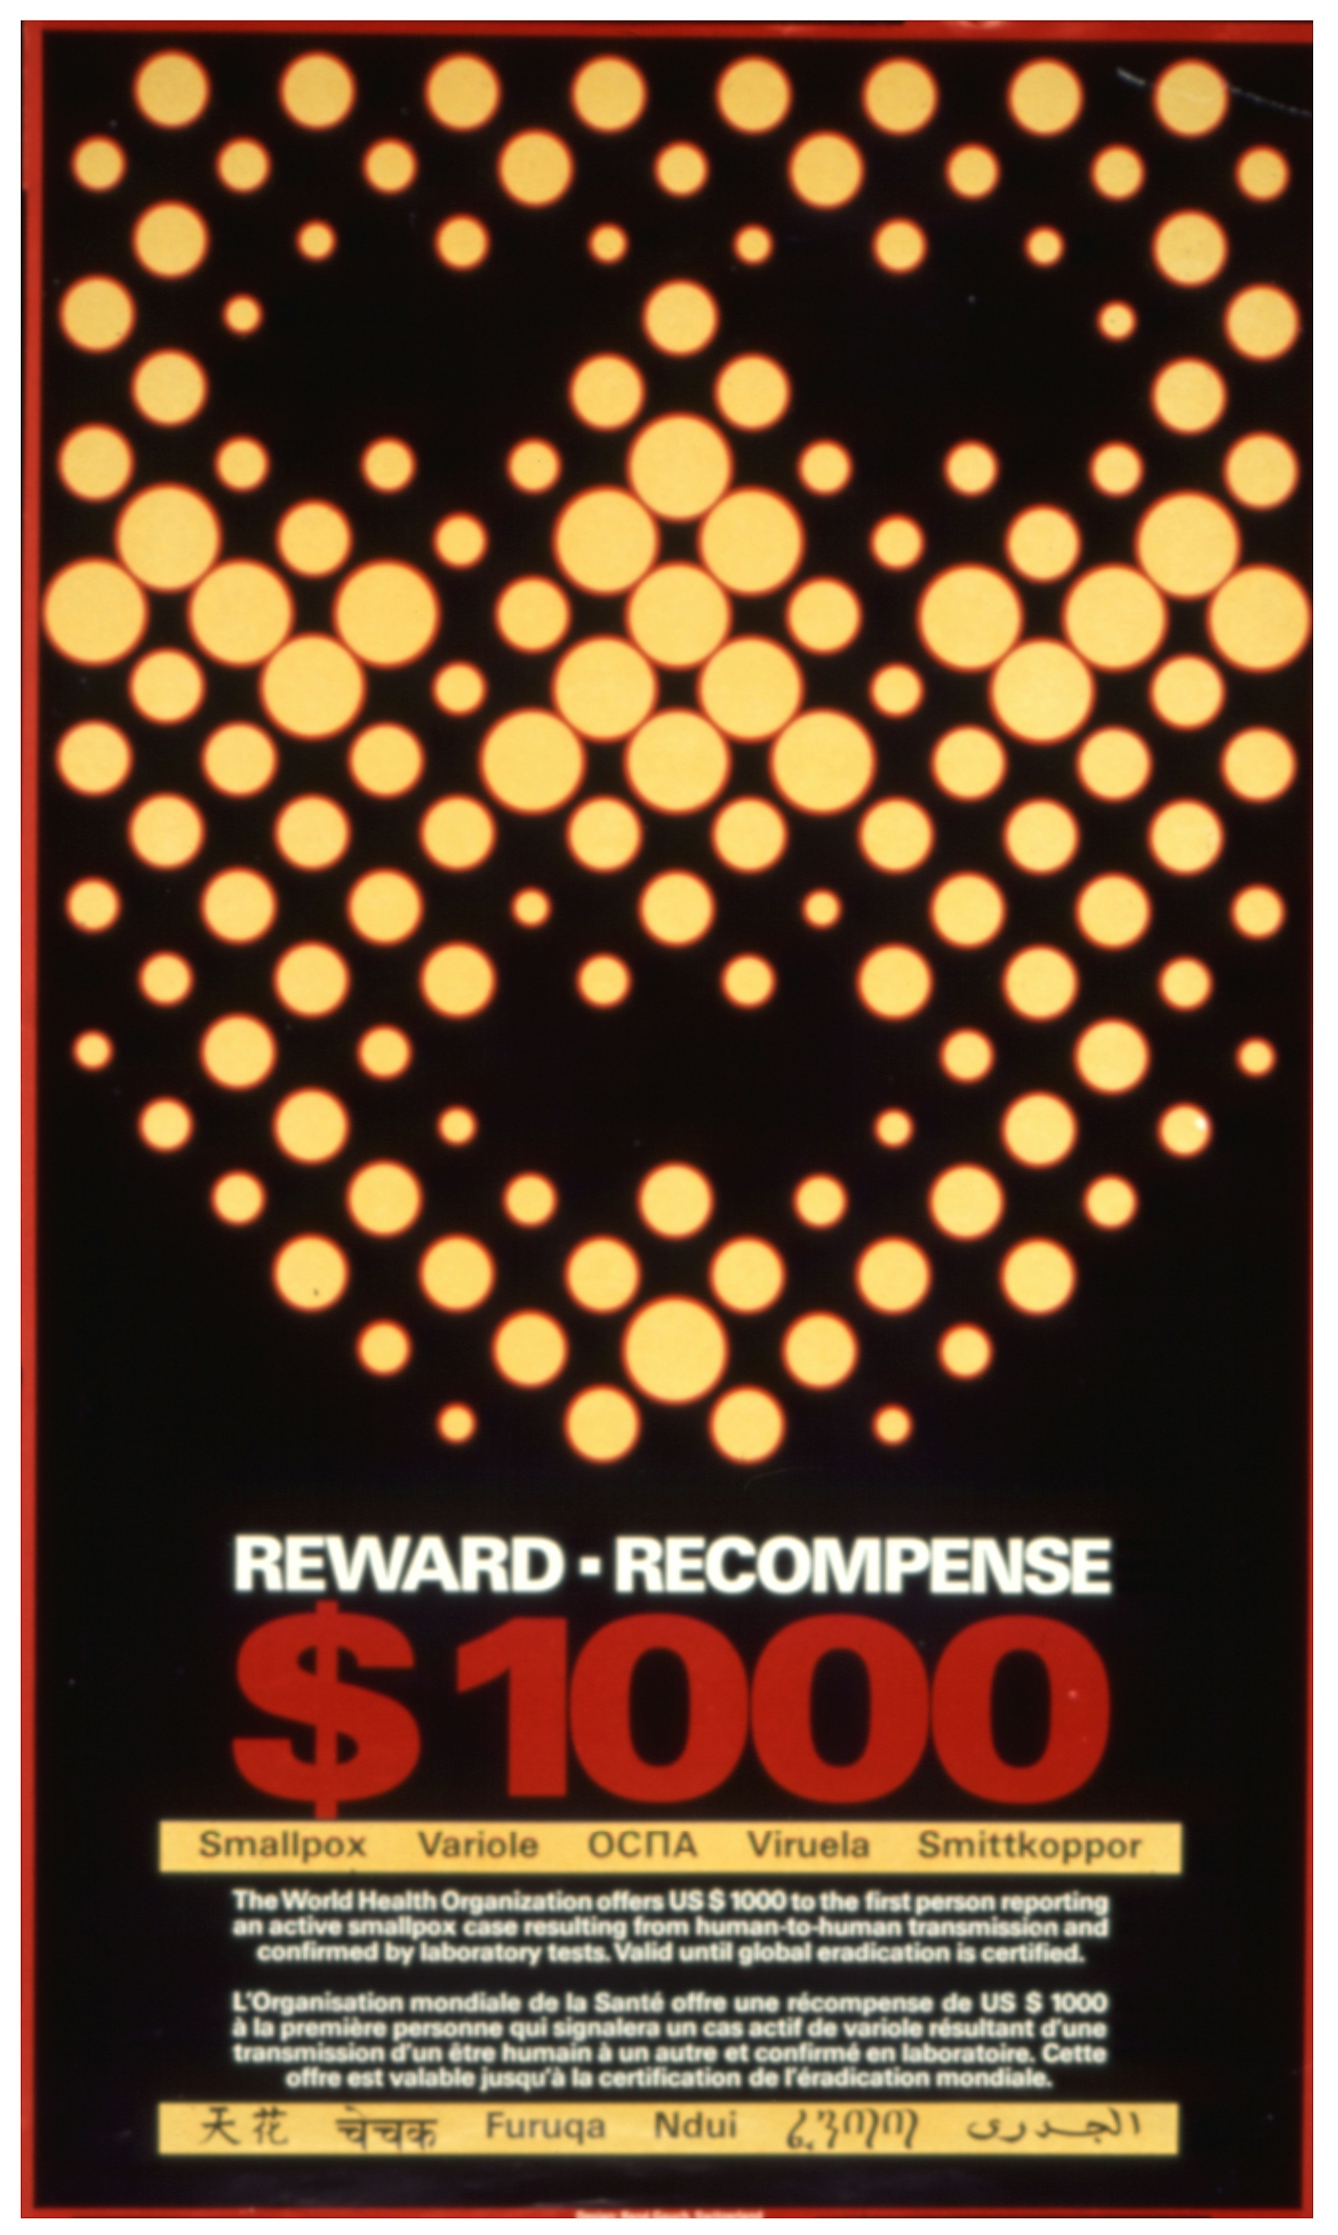 Poster offering a reward of 1000 dollars to 'the first person reporting an active smallpox case resulting from human to human transmission and confirmed by laboratory tests. Valid until global eradication is certified.'  Featuring an abstraction of a human face in a pointillist style, the symbolism in the design exhibits a haunting quality appropriate to the subject. The points are presumably meant to represent smallpox lesions. NOTE: Slide of original poster image is slightly blurry.